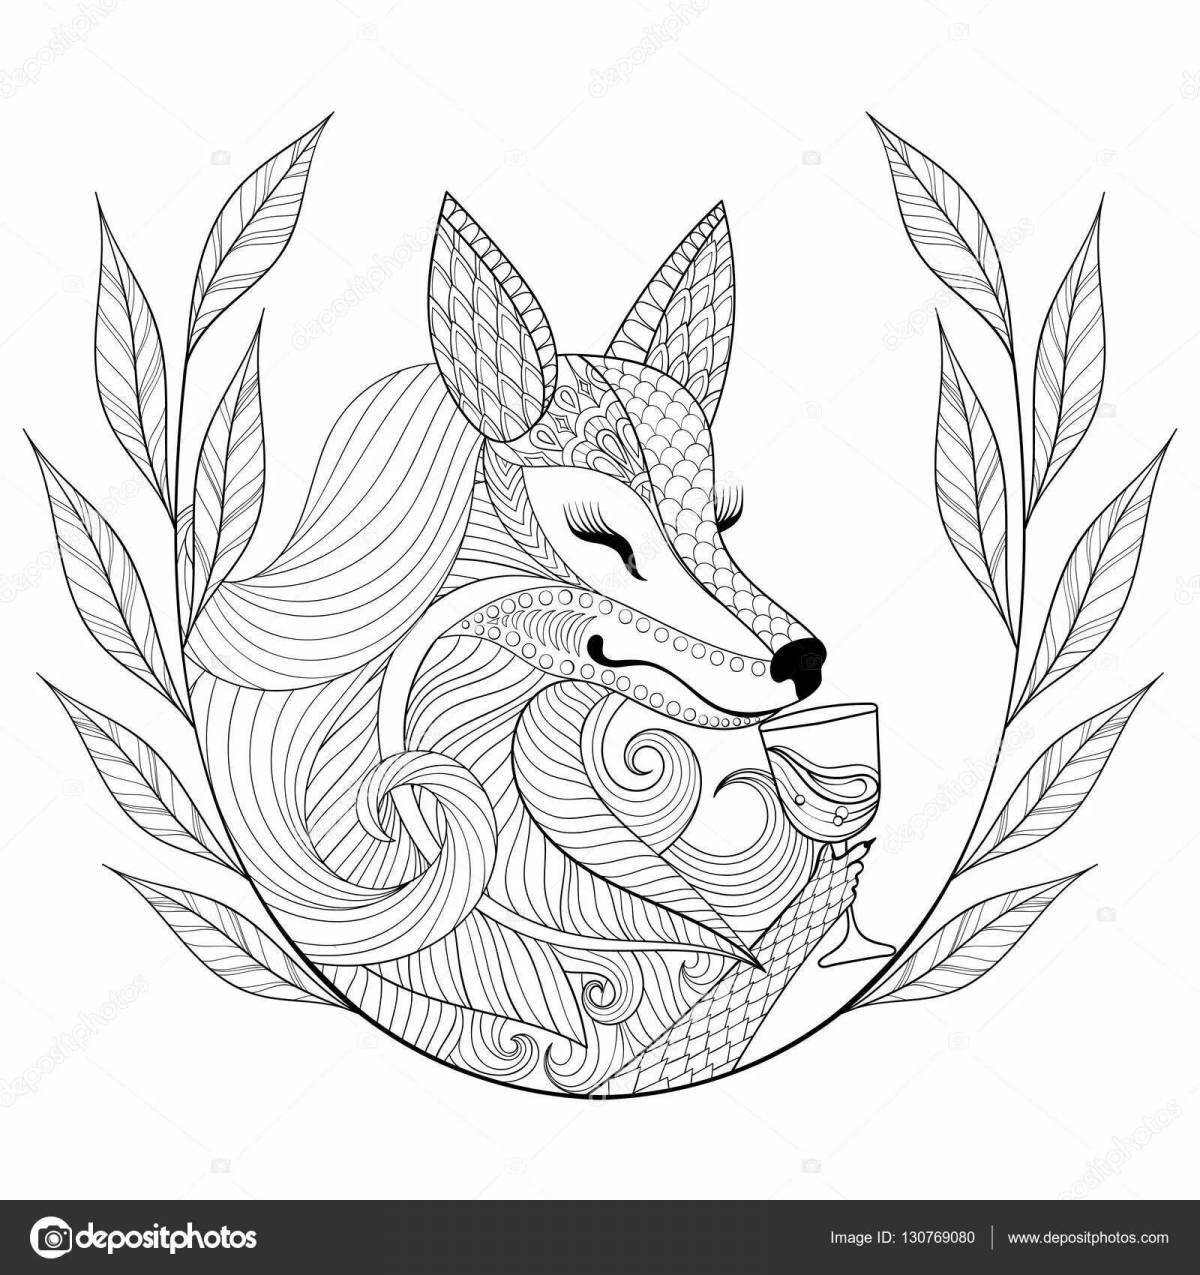 Colourful fox coloring book for adults